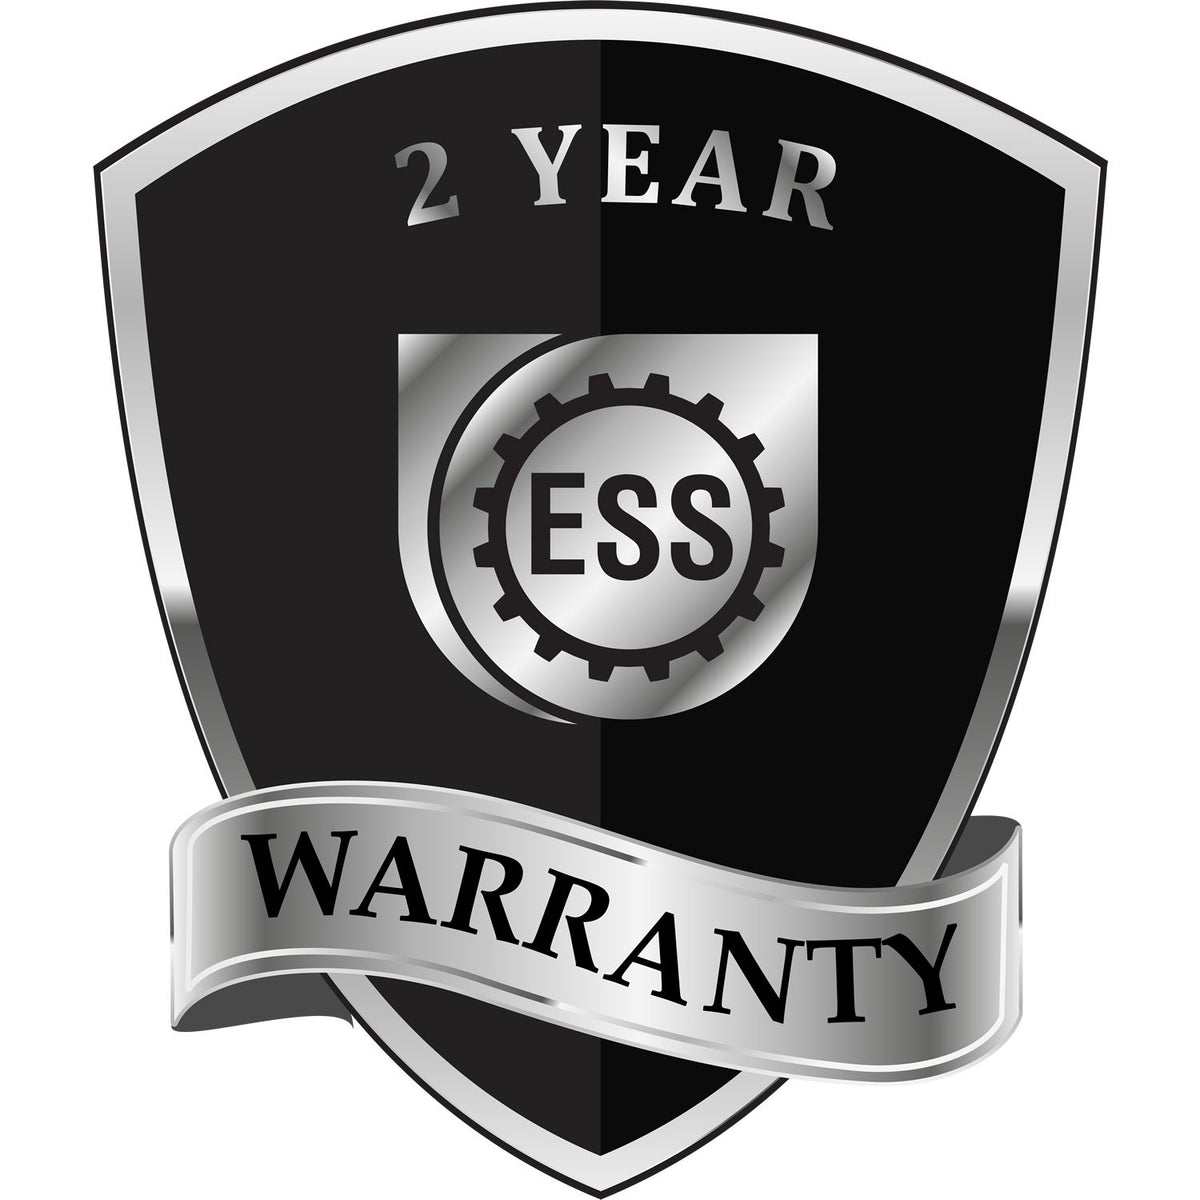 A black and silver badge or emblem showing warranty information for the Long Reach Nebraska Geology Seal